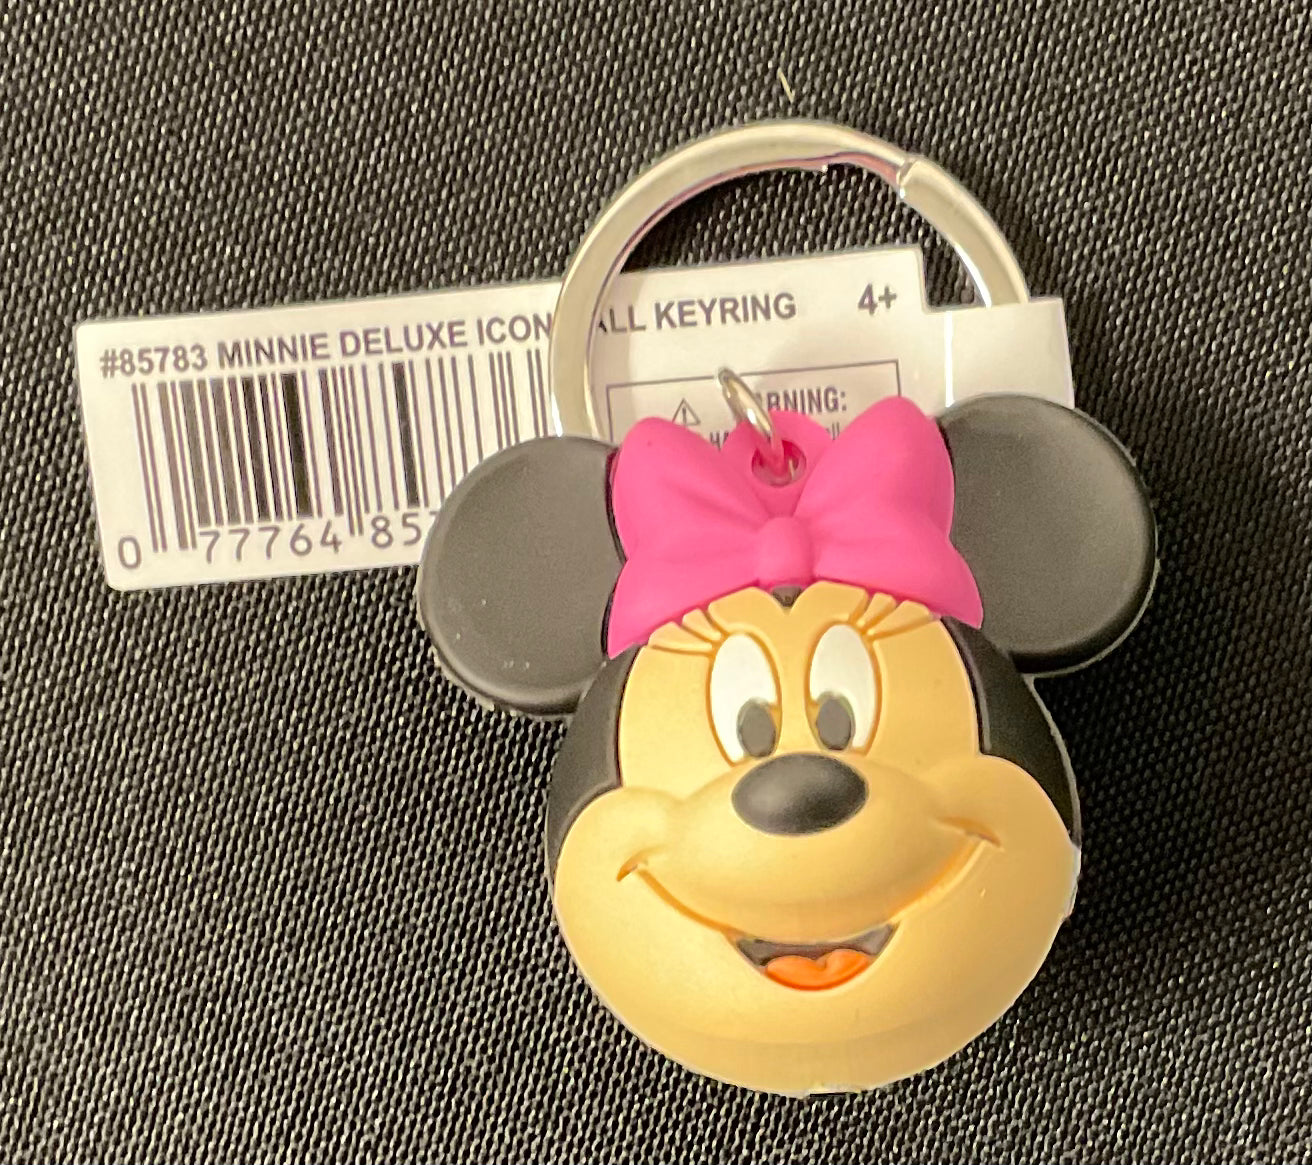 Officially Licensed Disney Minnie Deluxe Key Ring